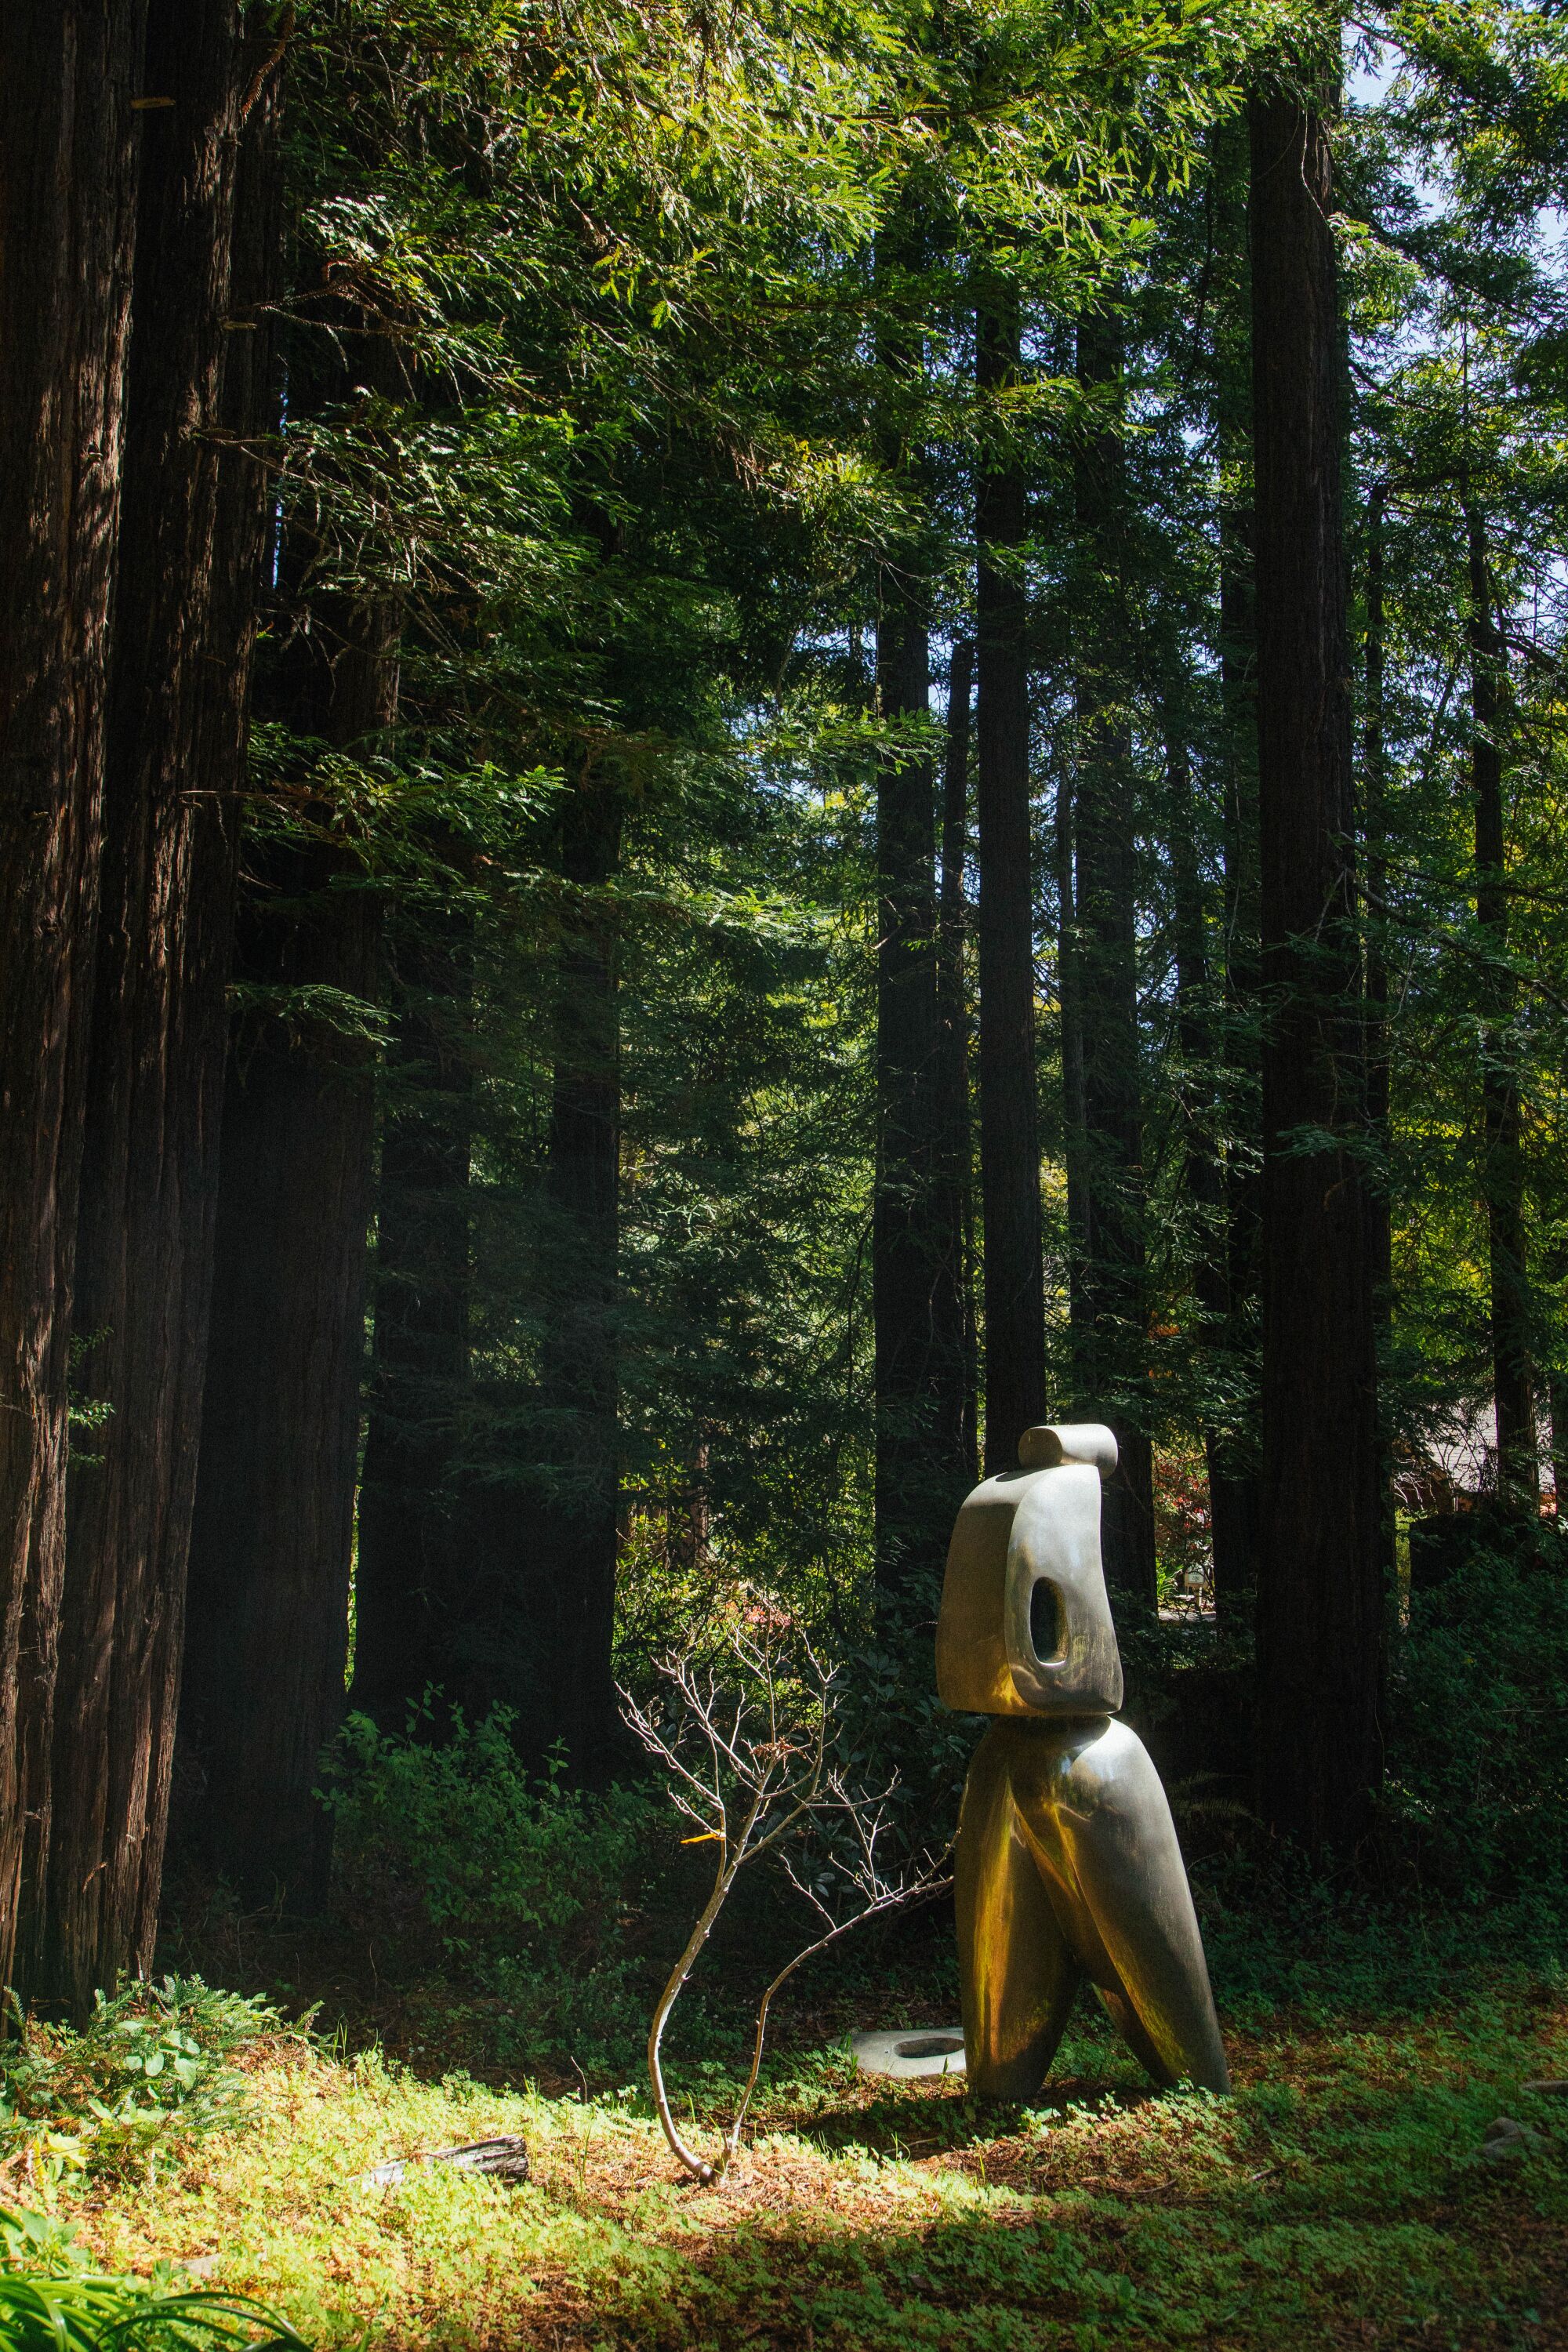 The sculpture "Strolling Man" stands amid trees.